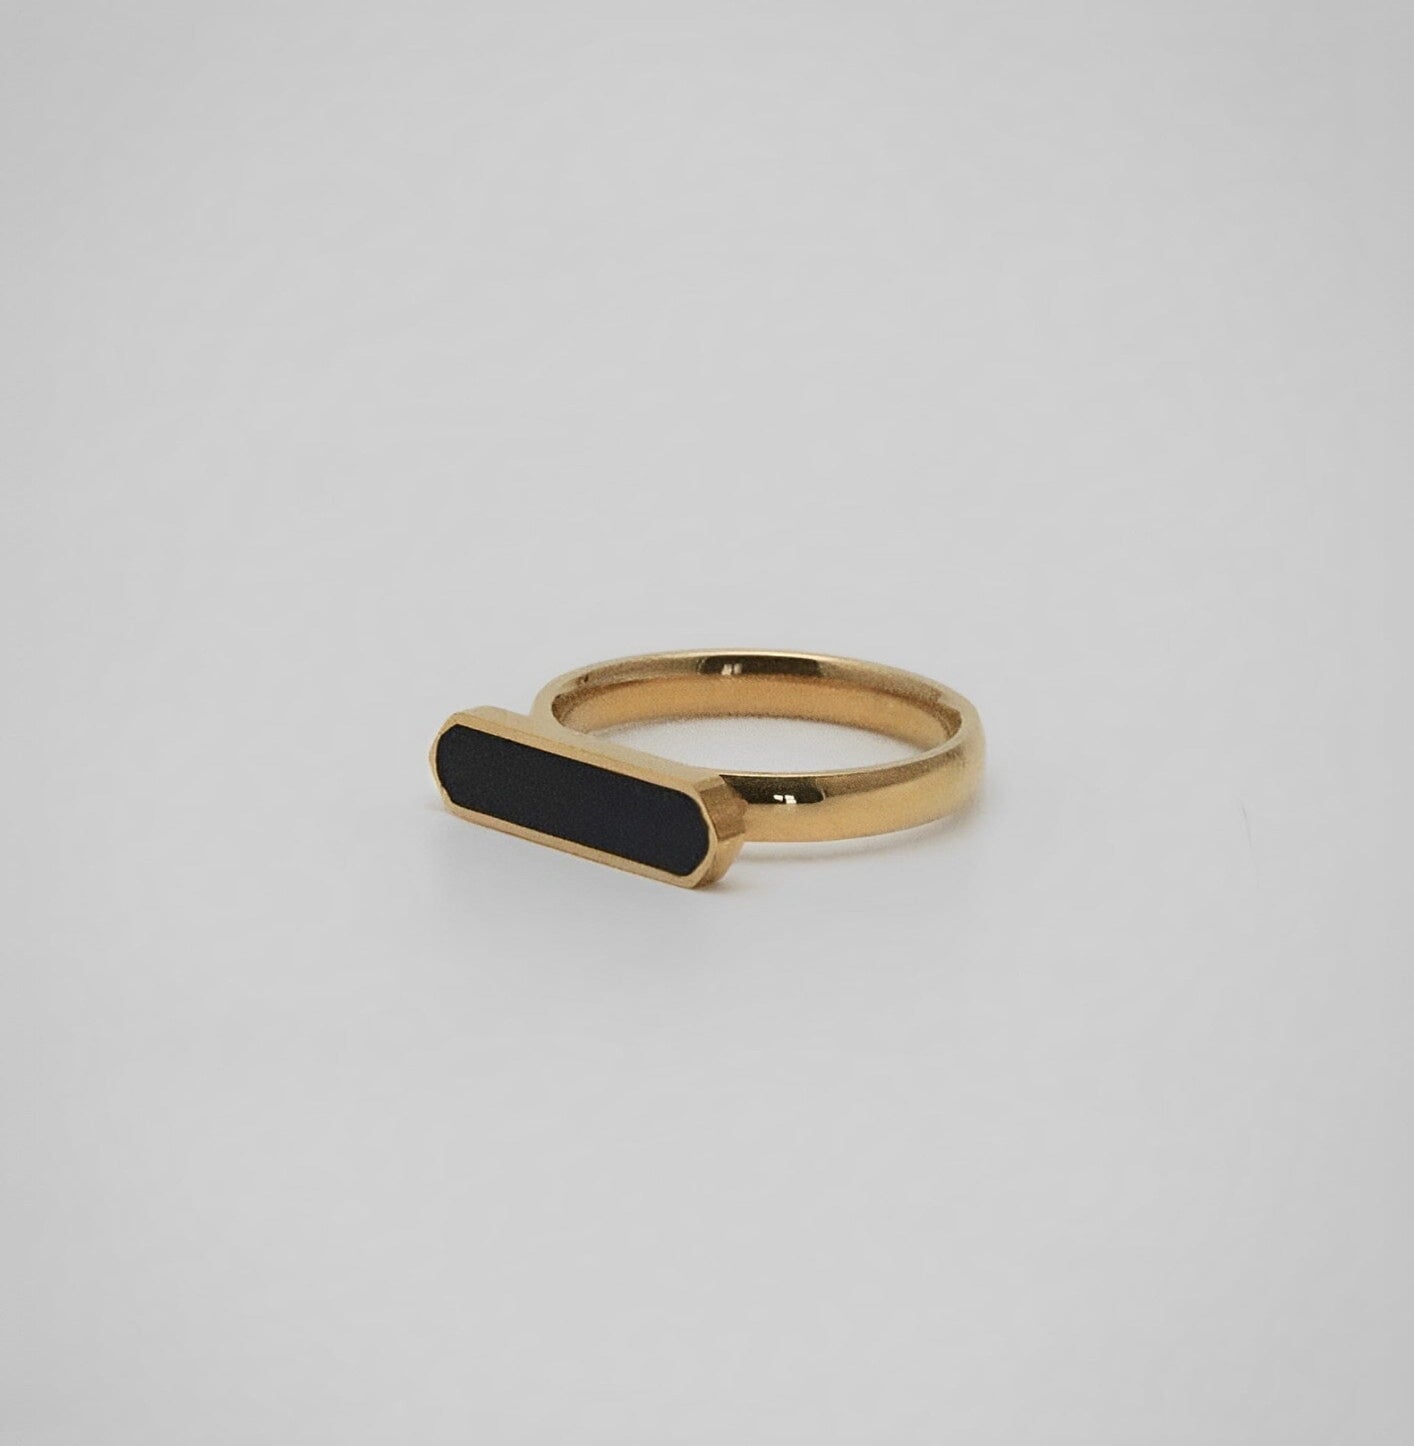 BLACK BAR RING ring Yubama Jewelry Online Store - The Elegant Designs of Gold and Silver ! 